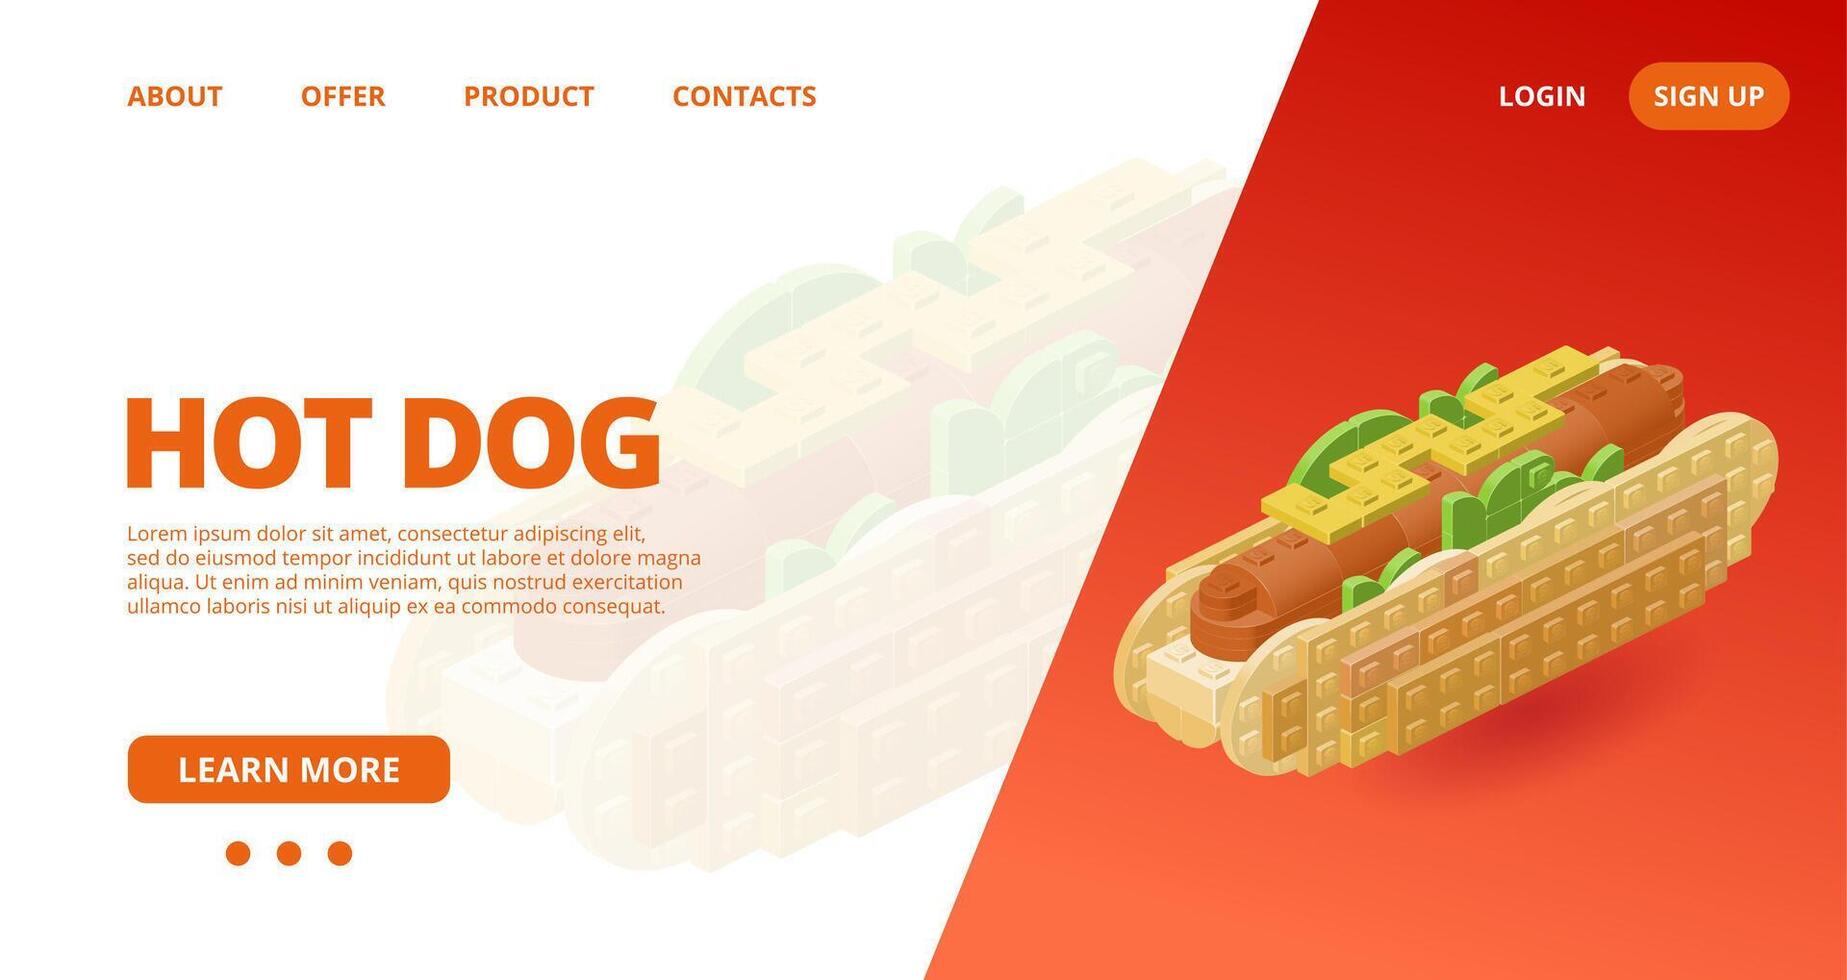 Web template with a hot dog. Vector